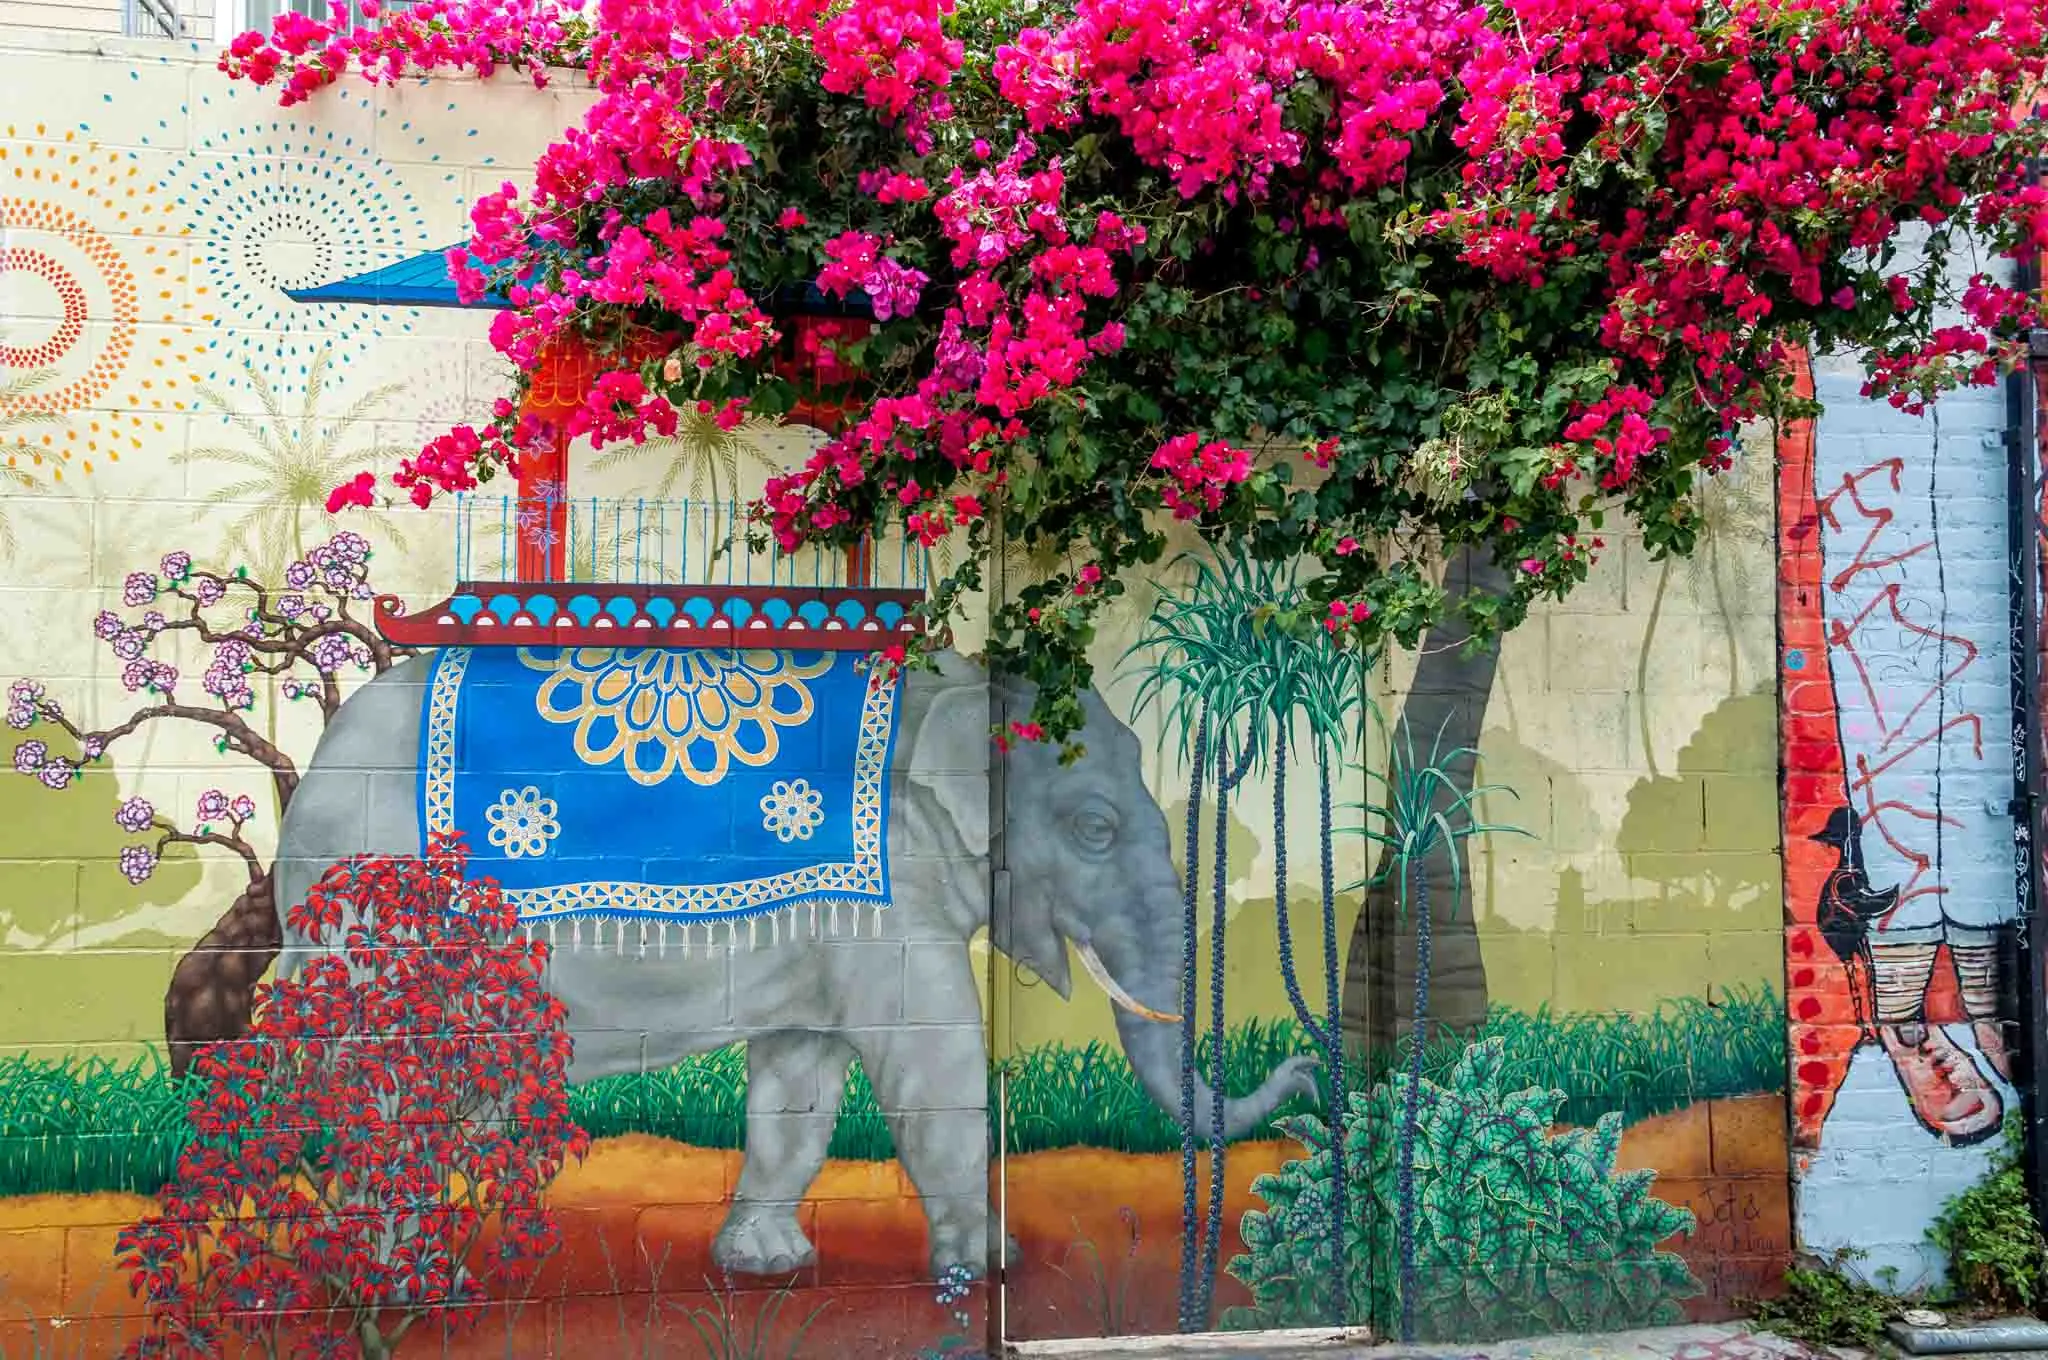 Elephant mural that combines with a tree with pink flowers